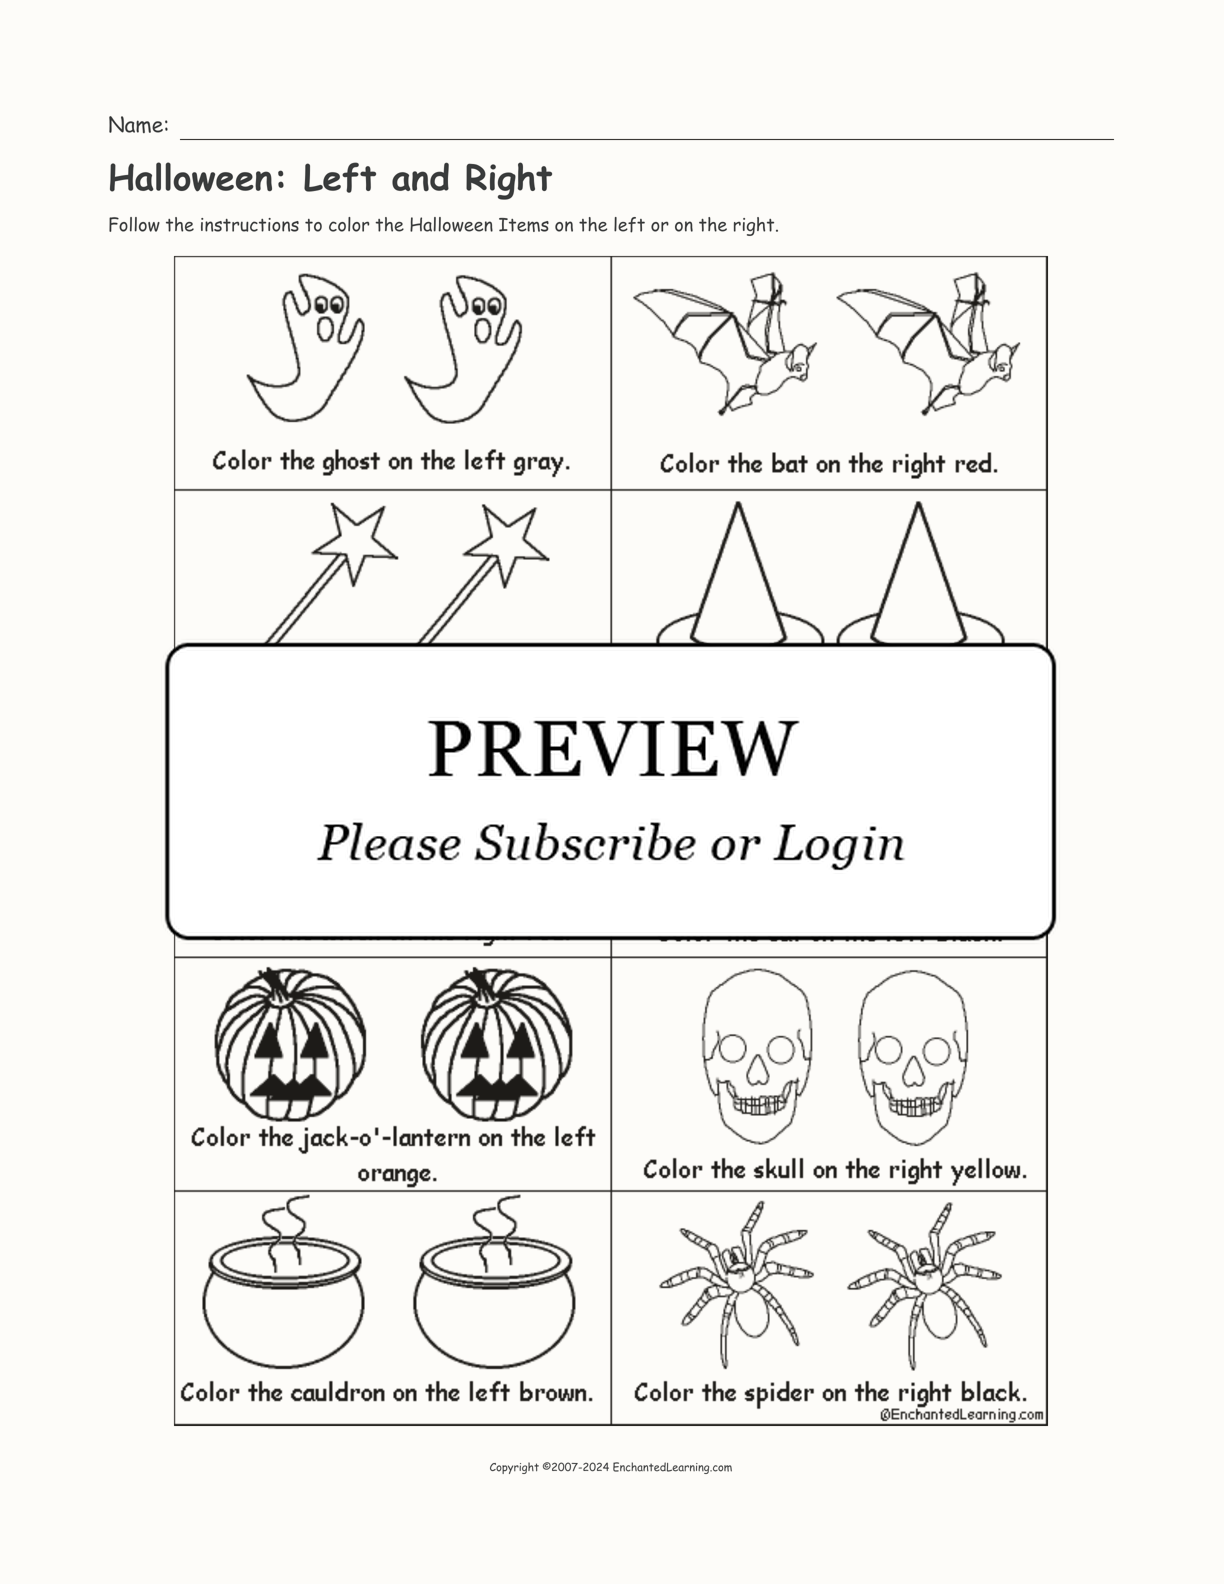 Halloween: Left and Right interactive worksheet page 1